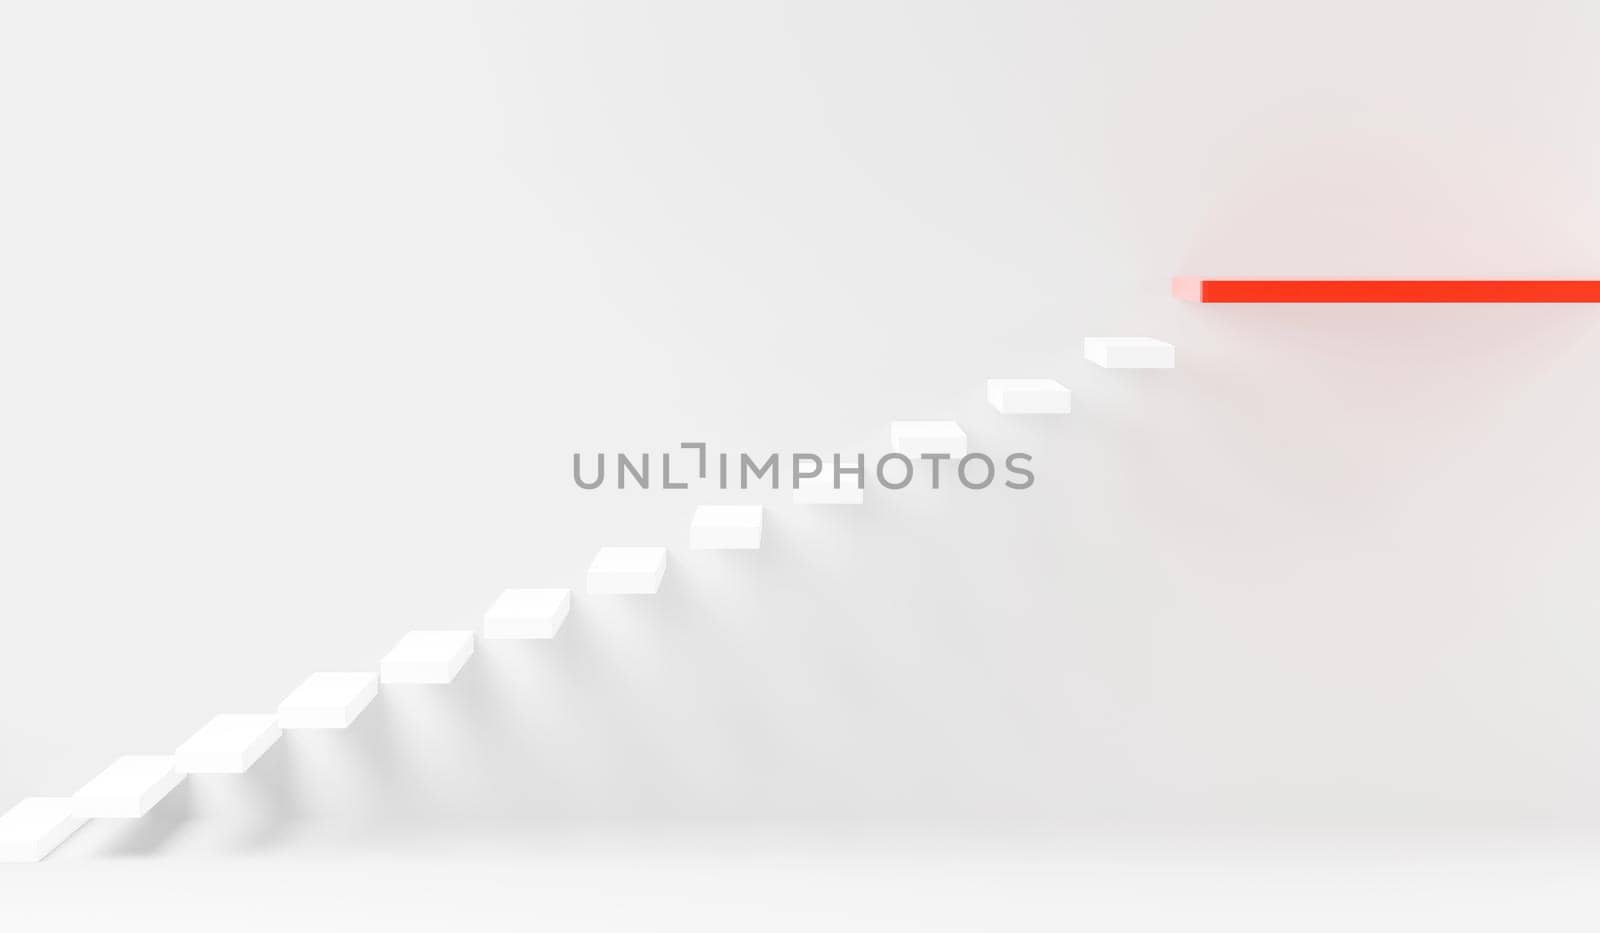 Stairs step up going success upward on interior white wall, Business growth, minimal modern graphic design, 3D rendering illustration